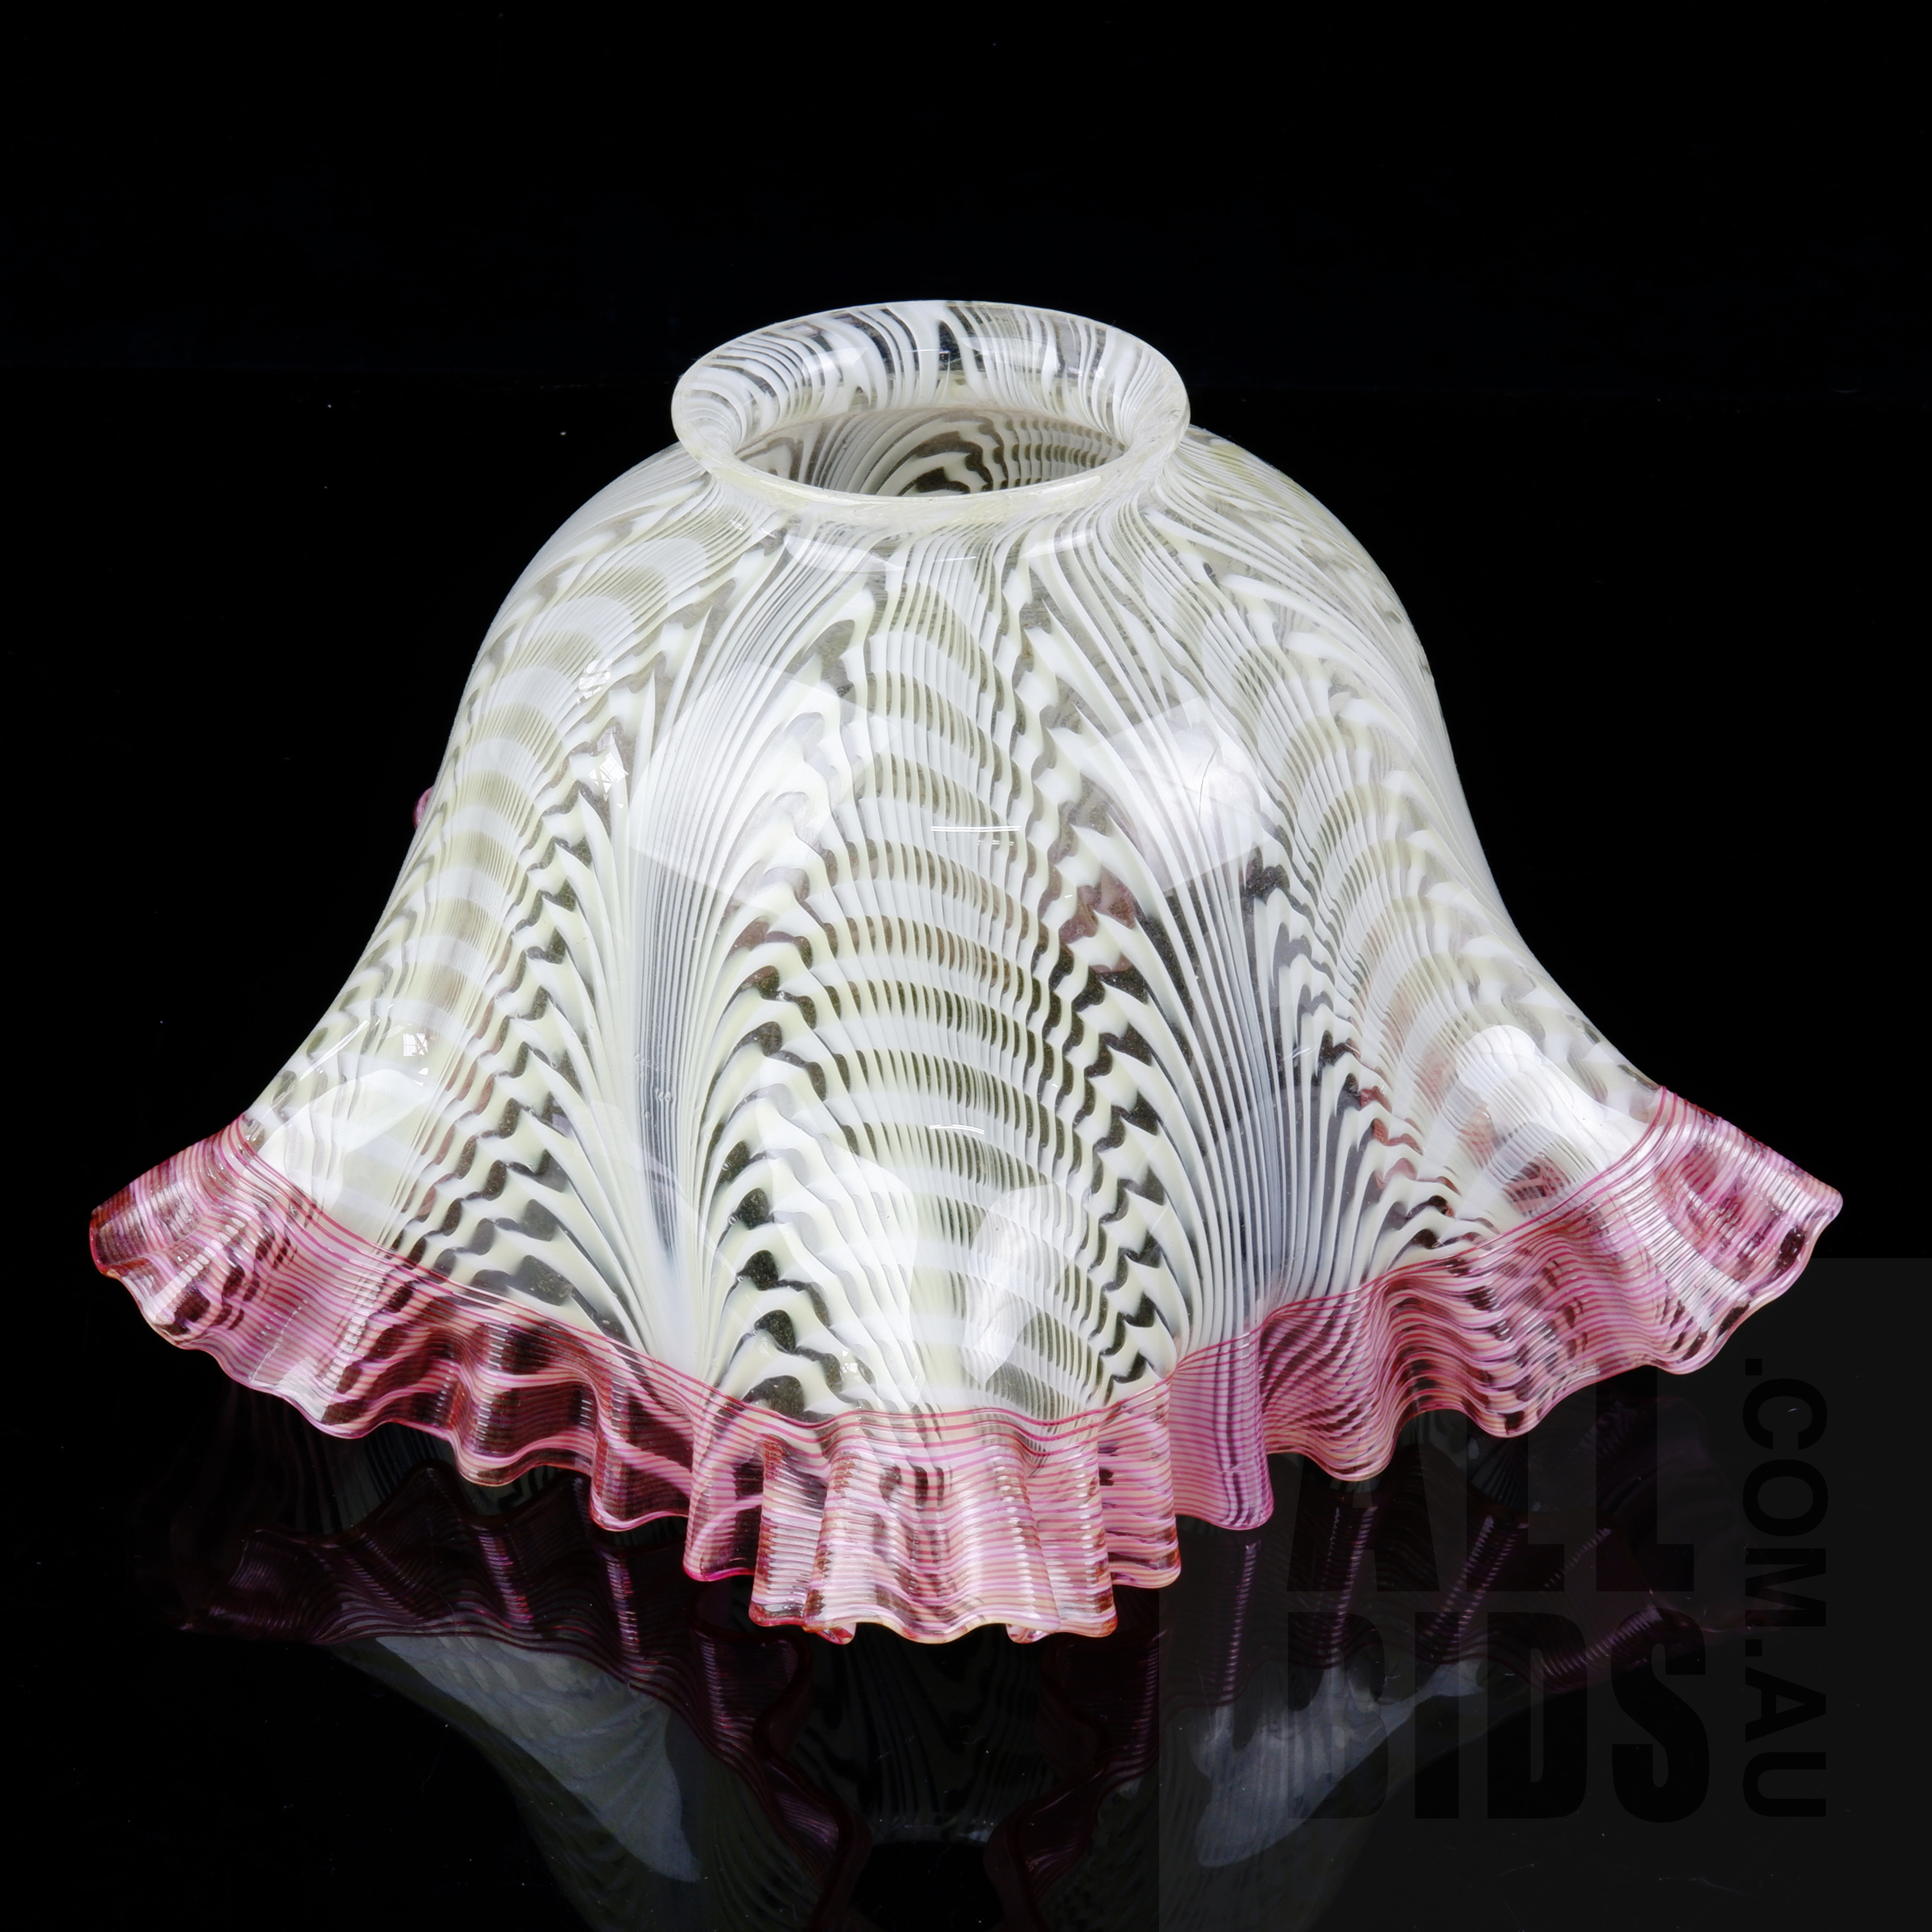 'Victorian Cased Glass Lampshade with Internal Combed Decoration and Spiral Ruby Threaded Rim'